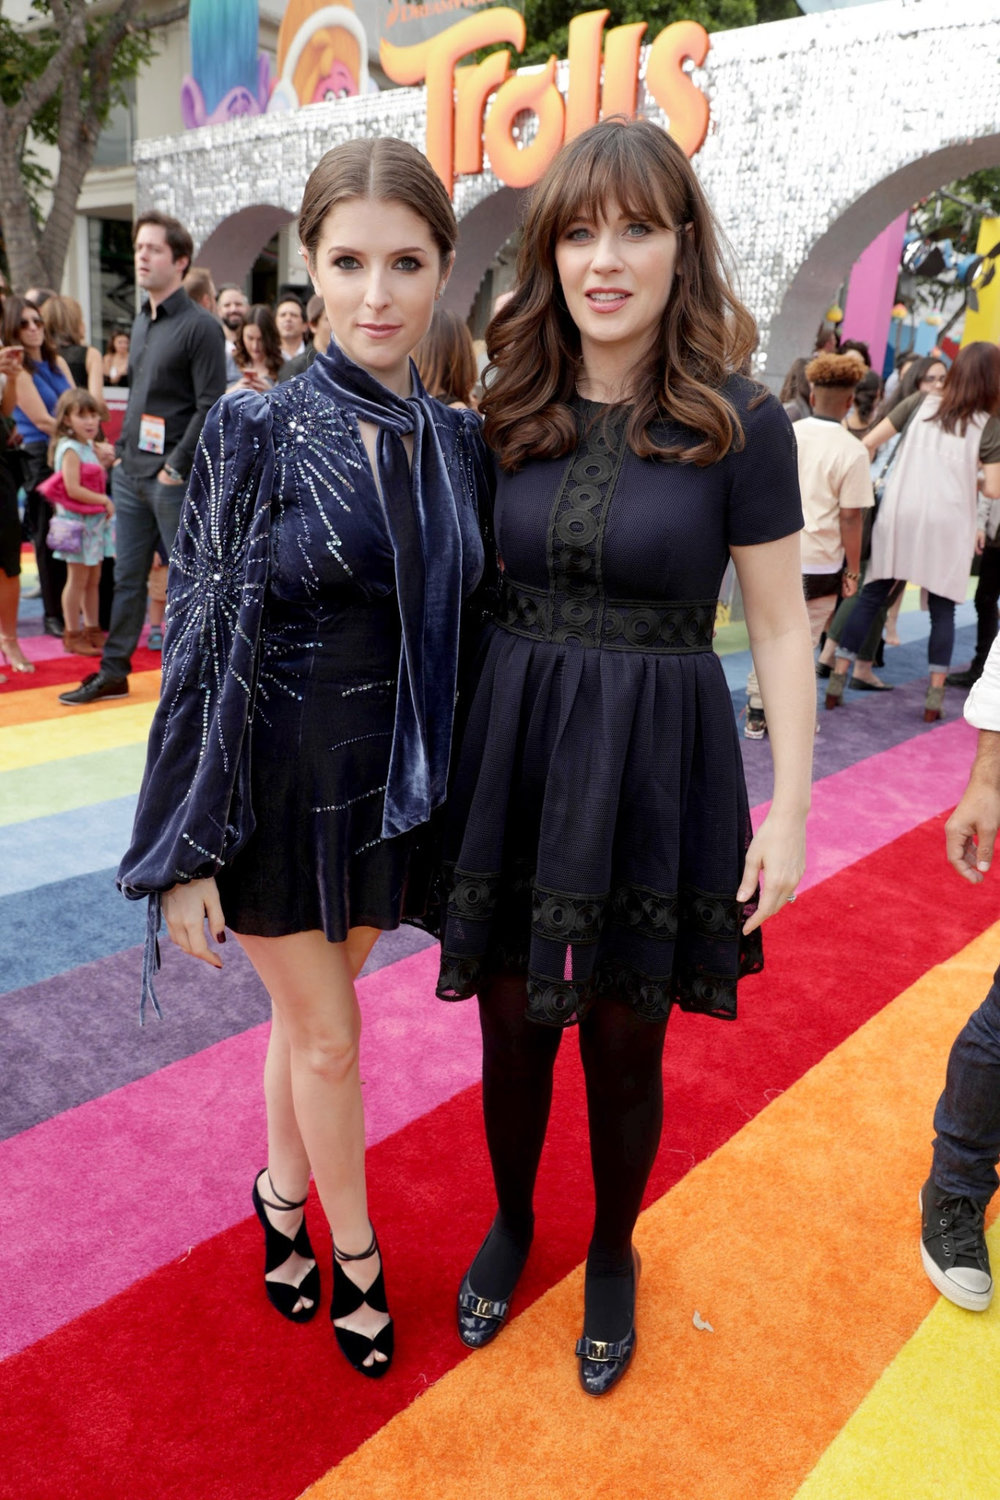  Anna Kendrick & Zooey Deschanel making the case for opaque tights versus a bare leg. It's all about what you are trying to communicate. 